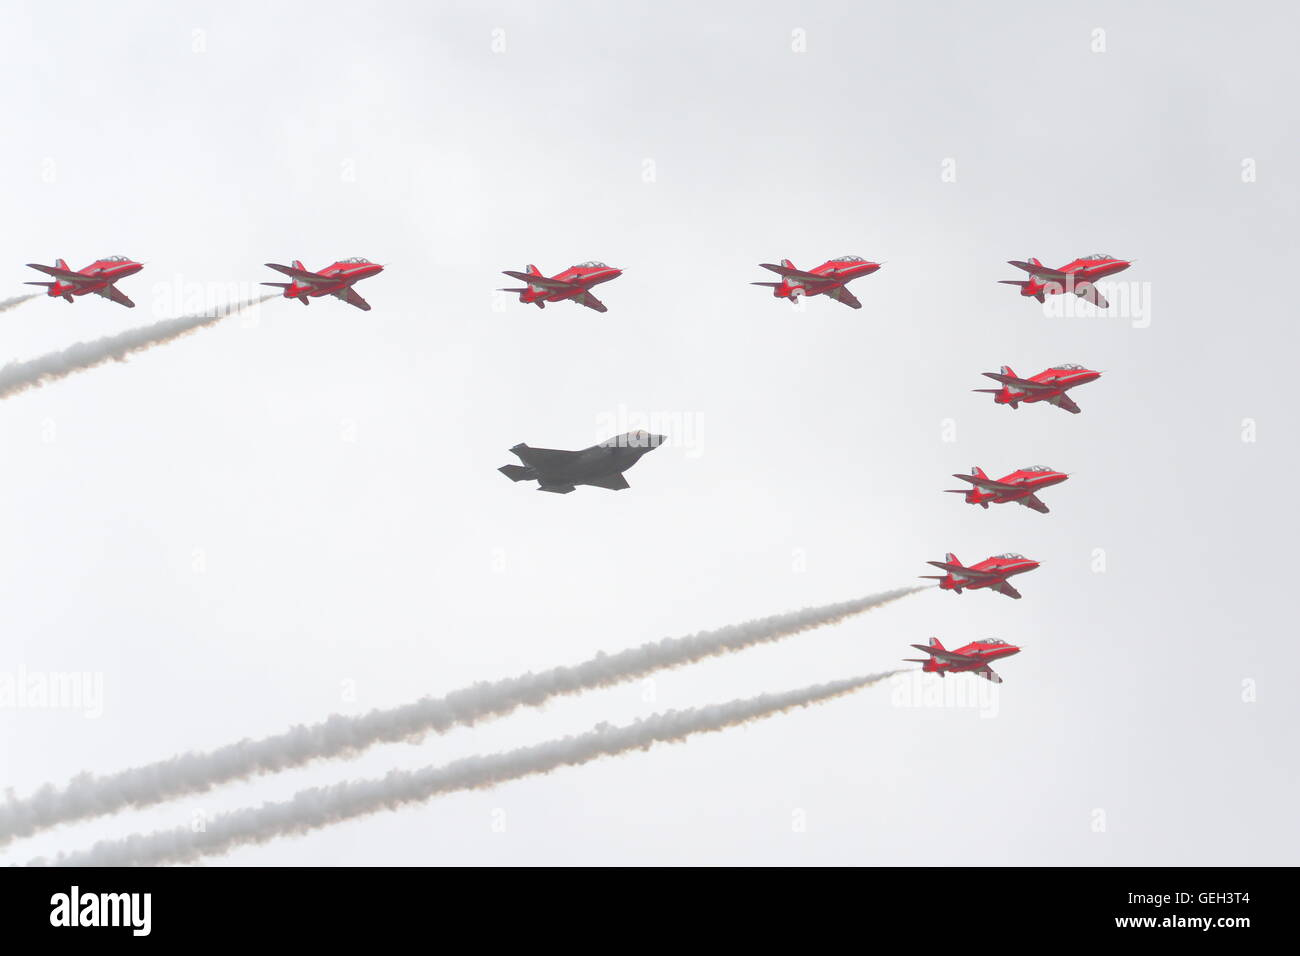 Flypast of a Lockheed Martin F35 accompanied by the Red Arrows at the Farnborough International Airshow 2016, UK Stock Photo